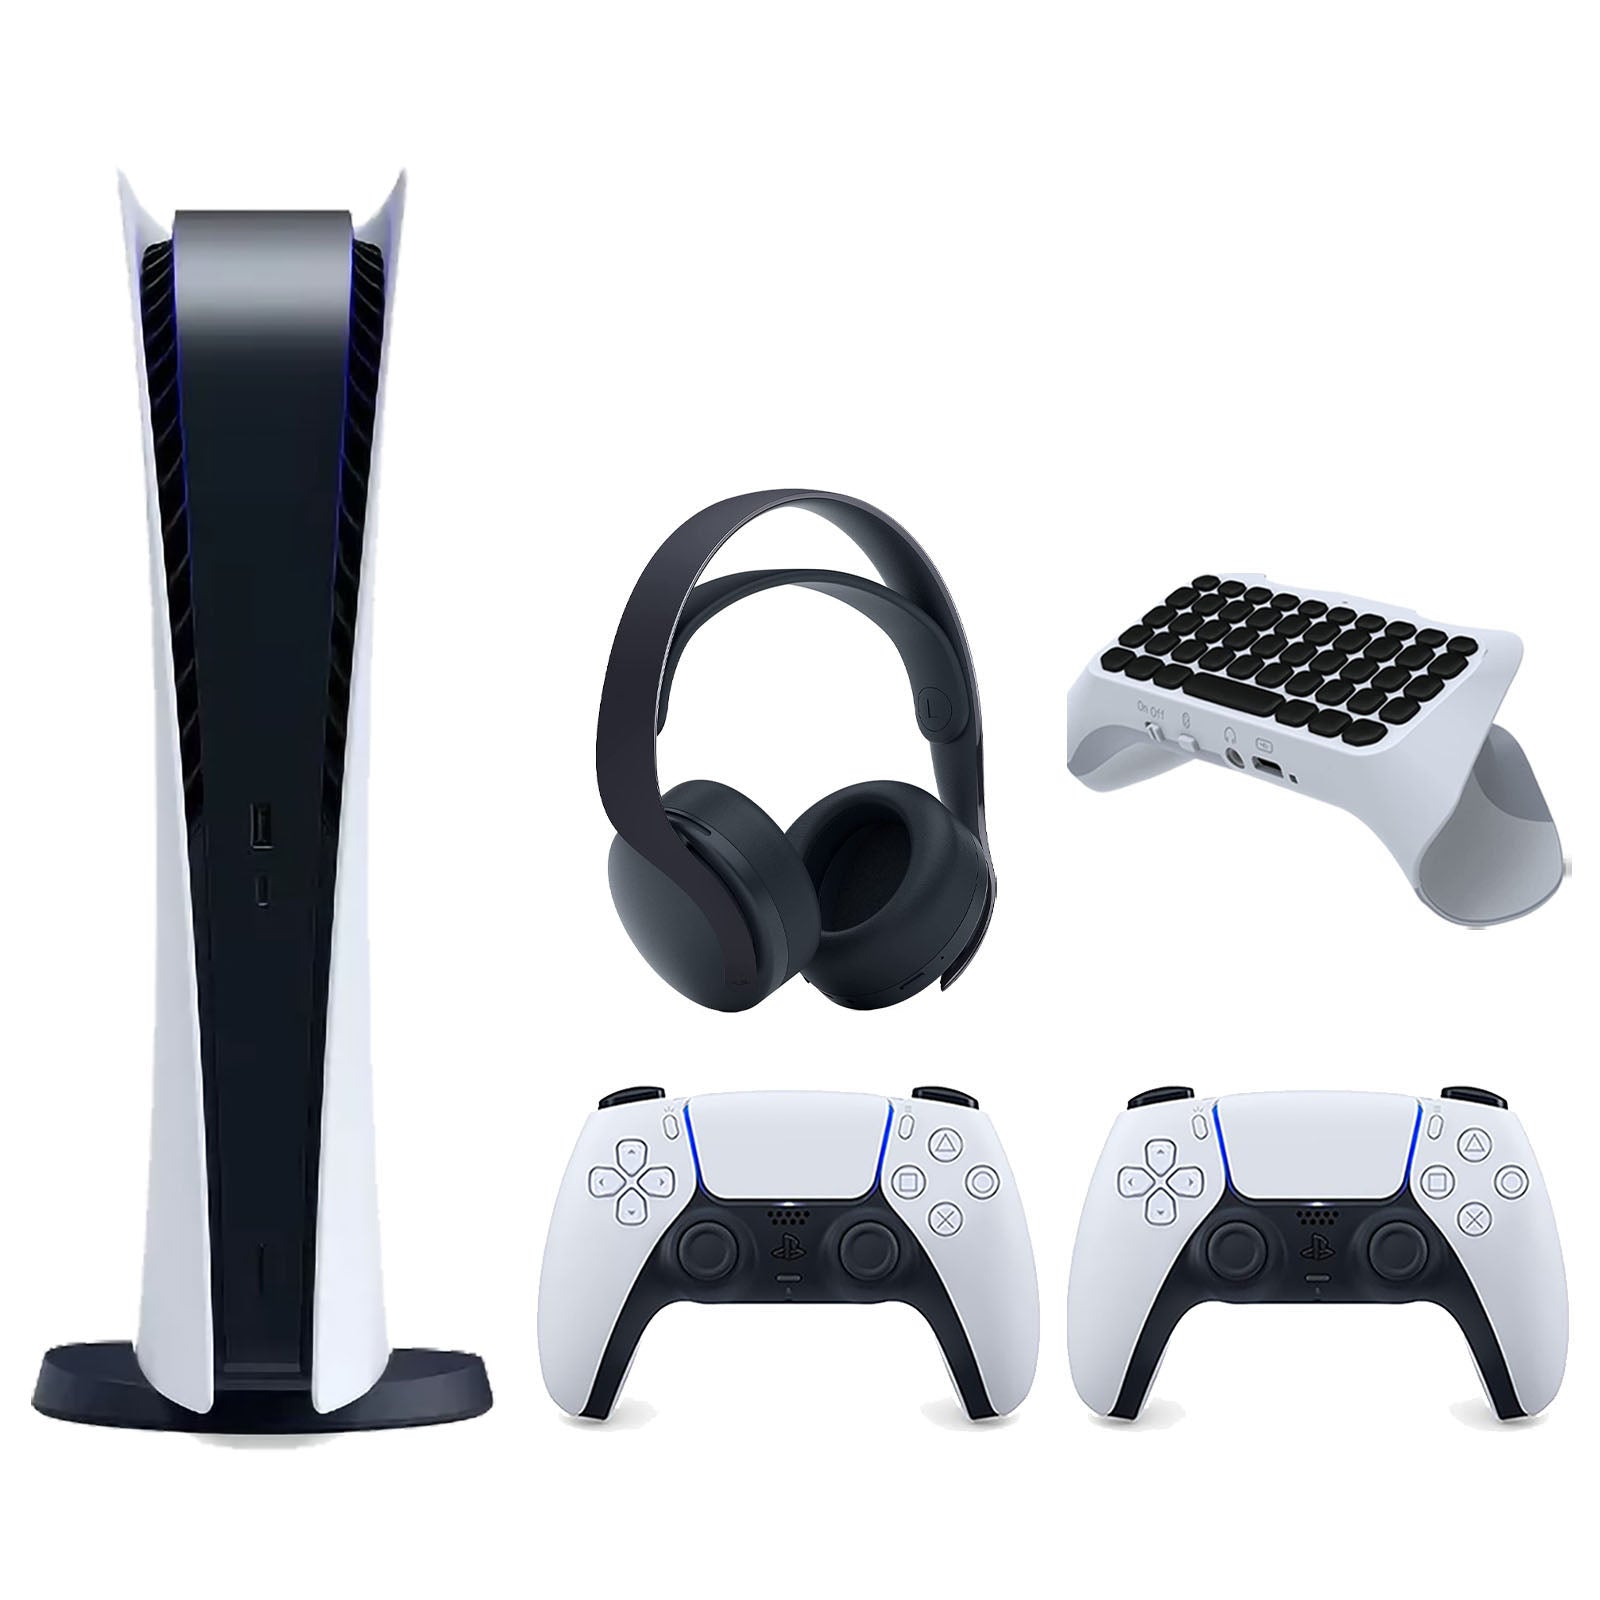 Sony Playstation 5 Digital Edition Console with Extra White Controller, Black PULSE 3D Headset and Surge QuickType 2.0 Wireless PS5 Controller Keypad Bundle - Pro-Distributing